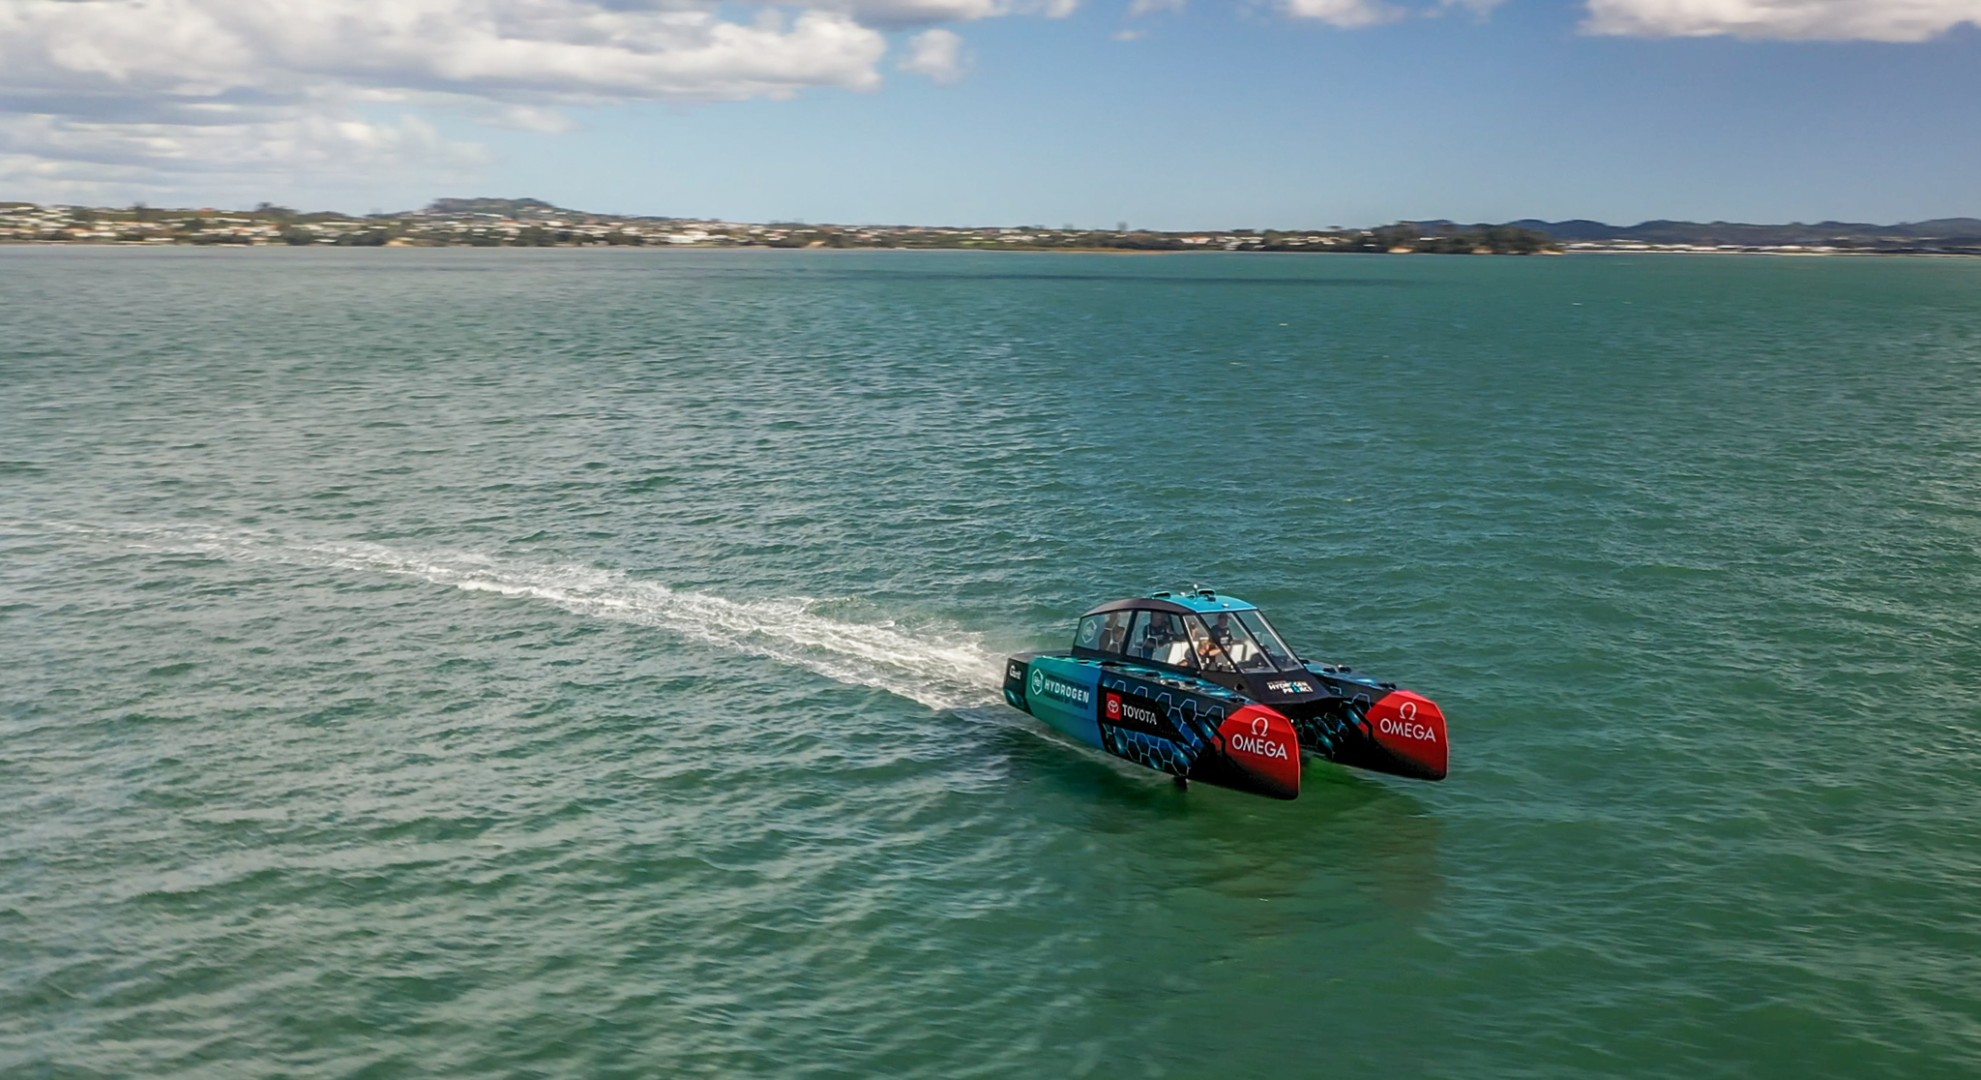 ETNZ take flight in hydrogen-powered foiling chase boat